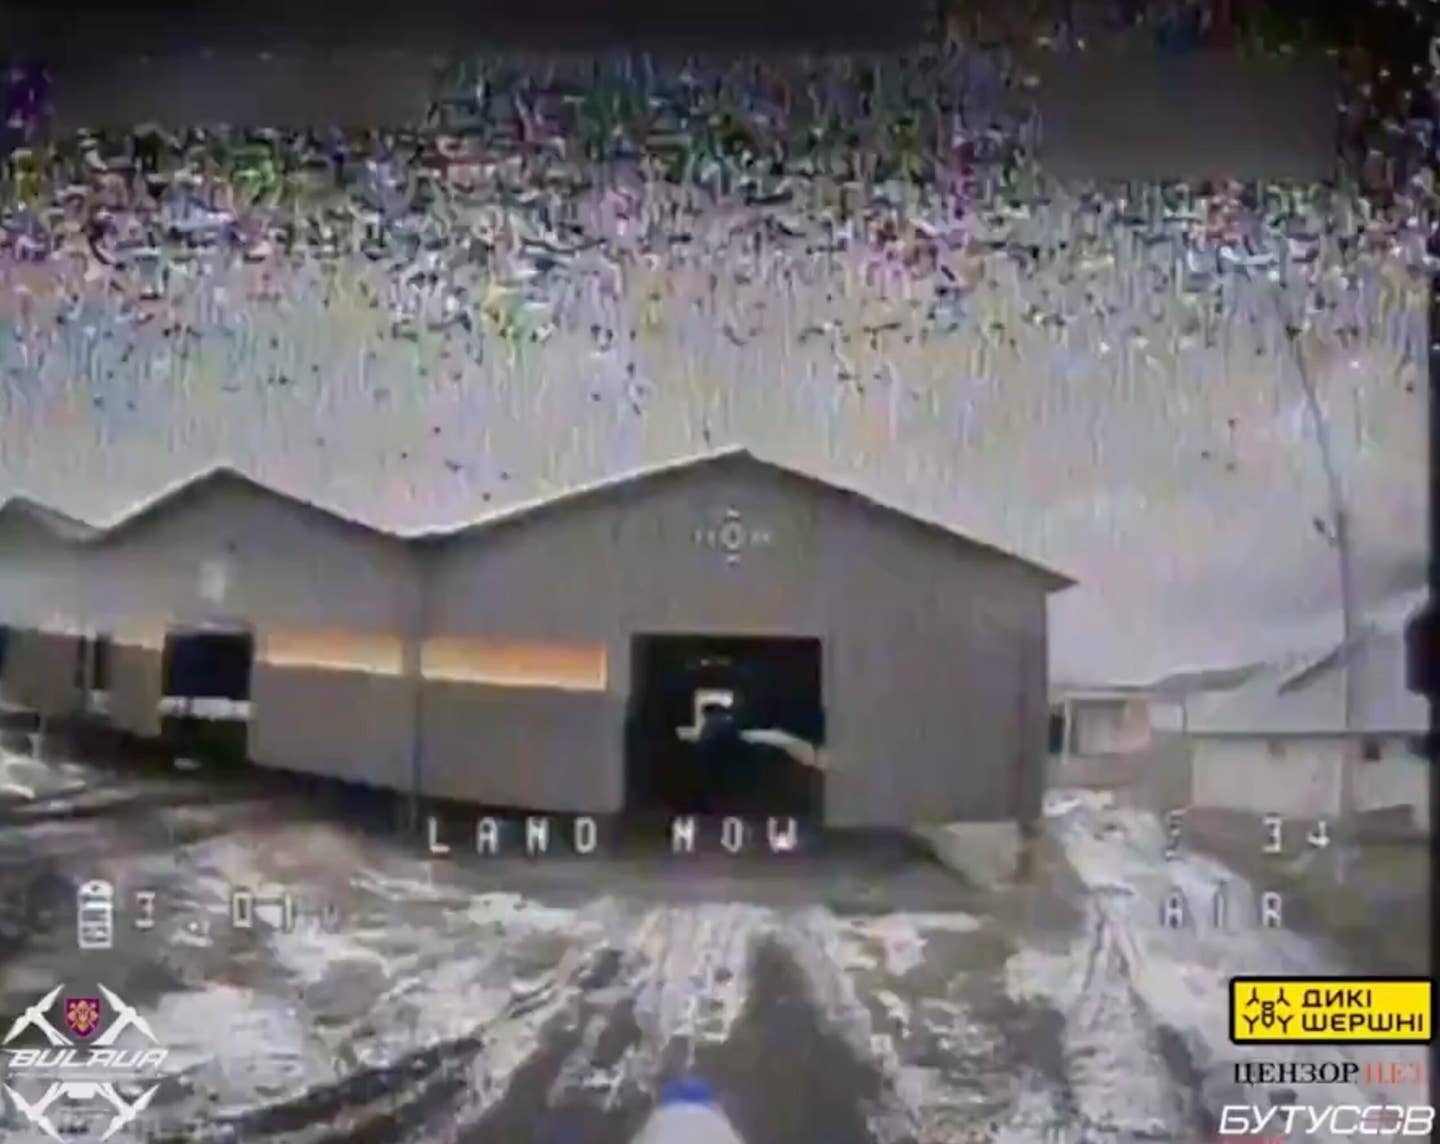 First FPV drone seen slowly approaching one of the warehouse's entrances. <em>Via Twitter/X</em>